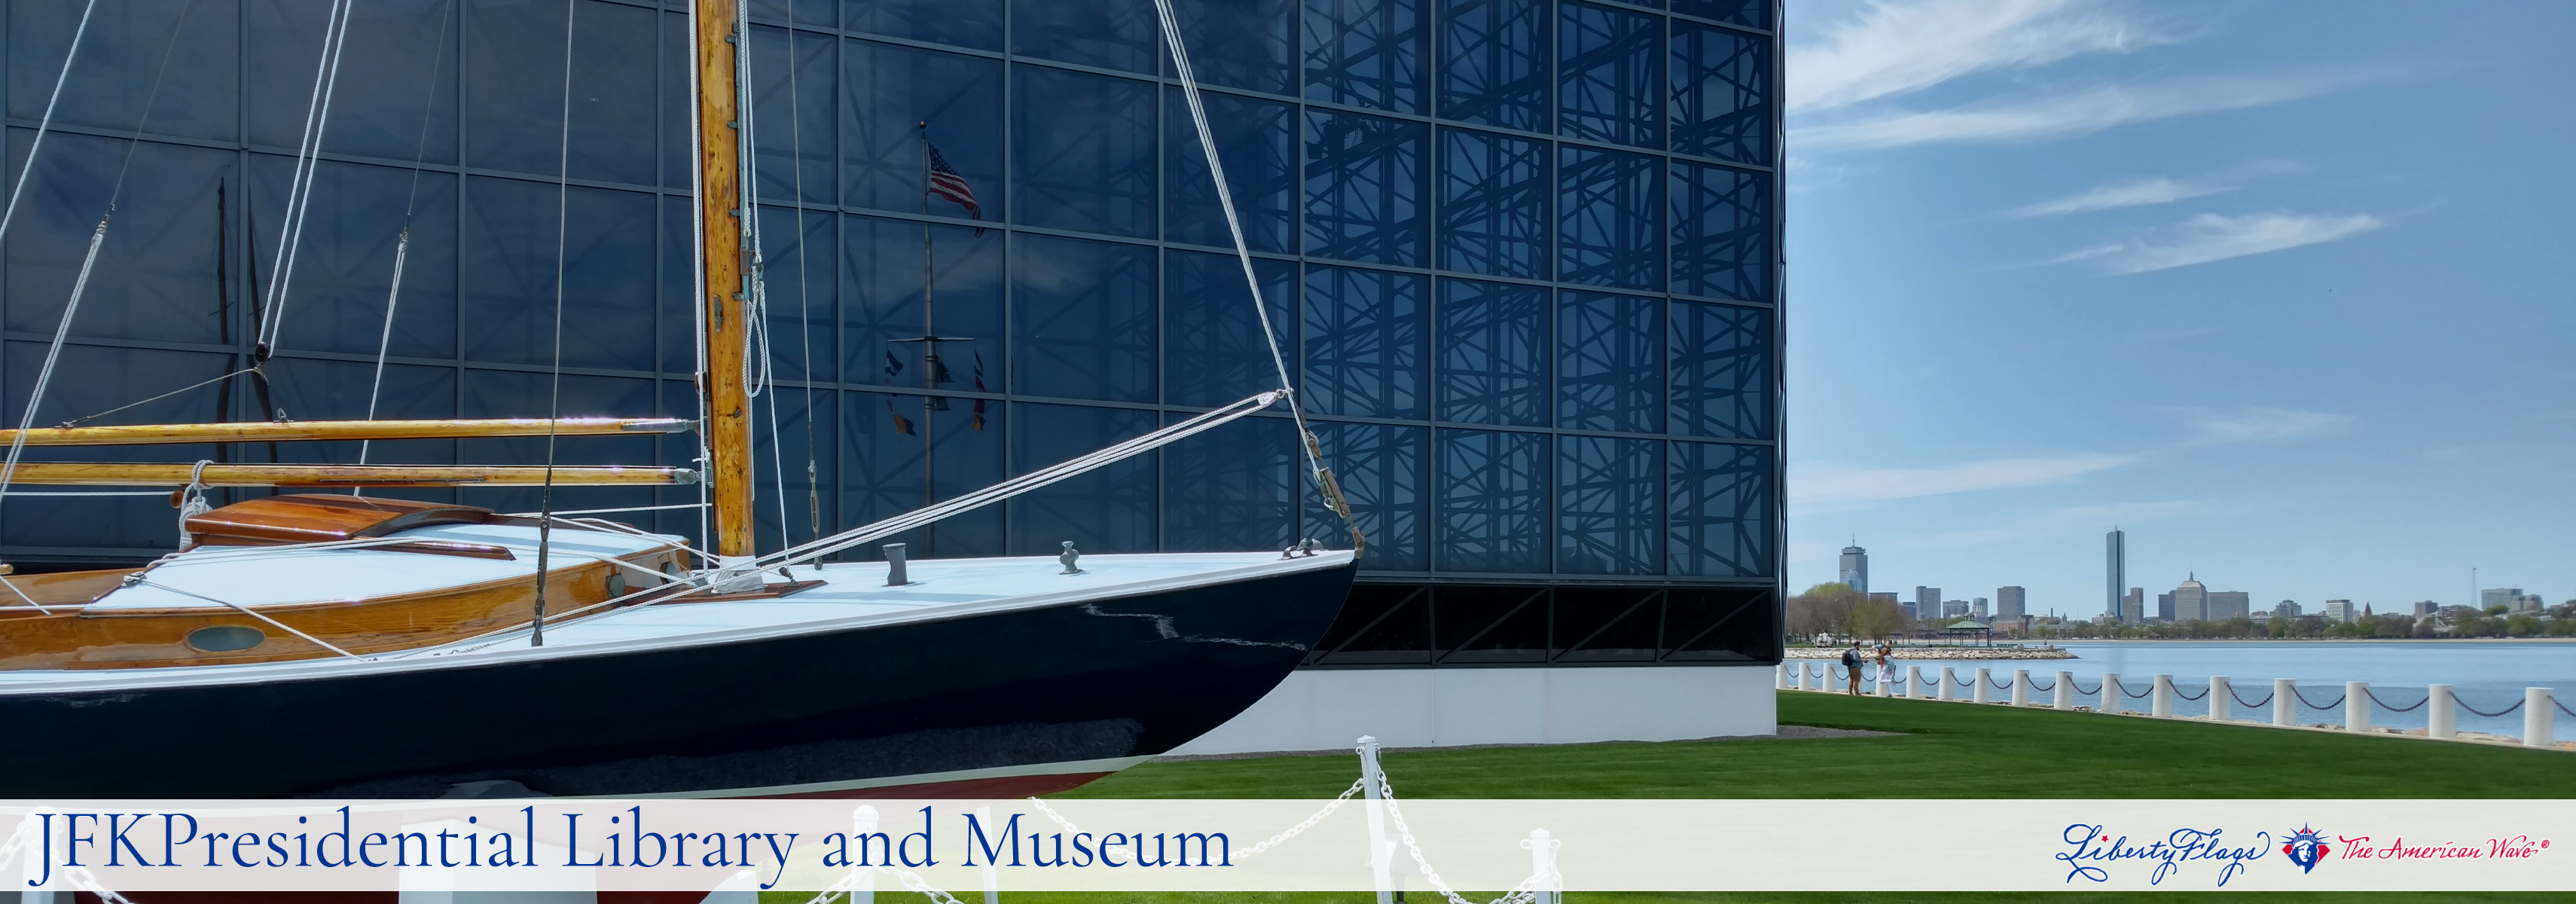 “John F. Kennedy Presidential Library and Museum, with LIBERTY FLAGS, The American Wave®